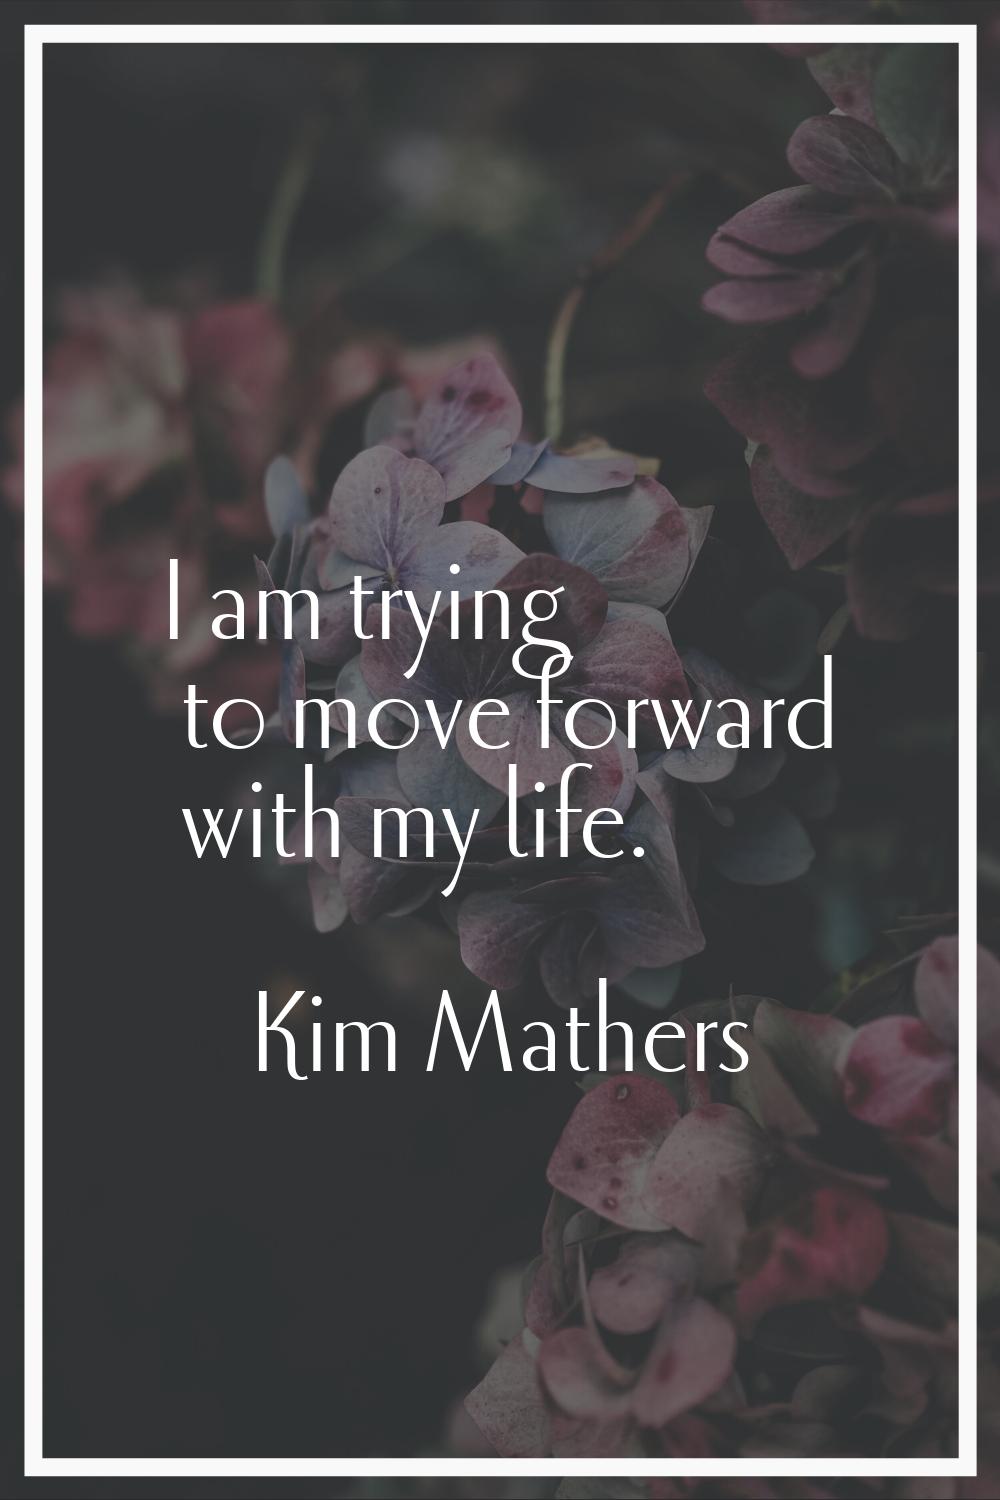 I am trying to move forward with my life.